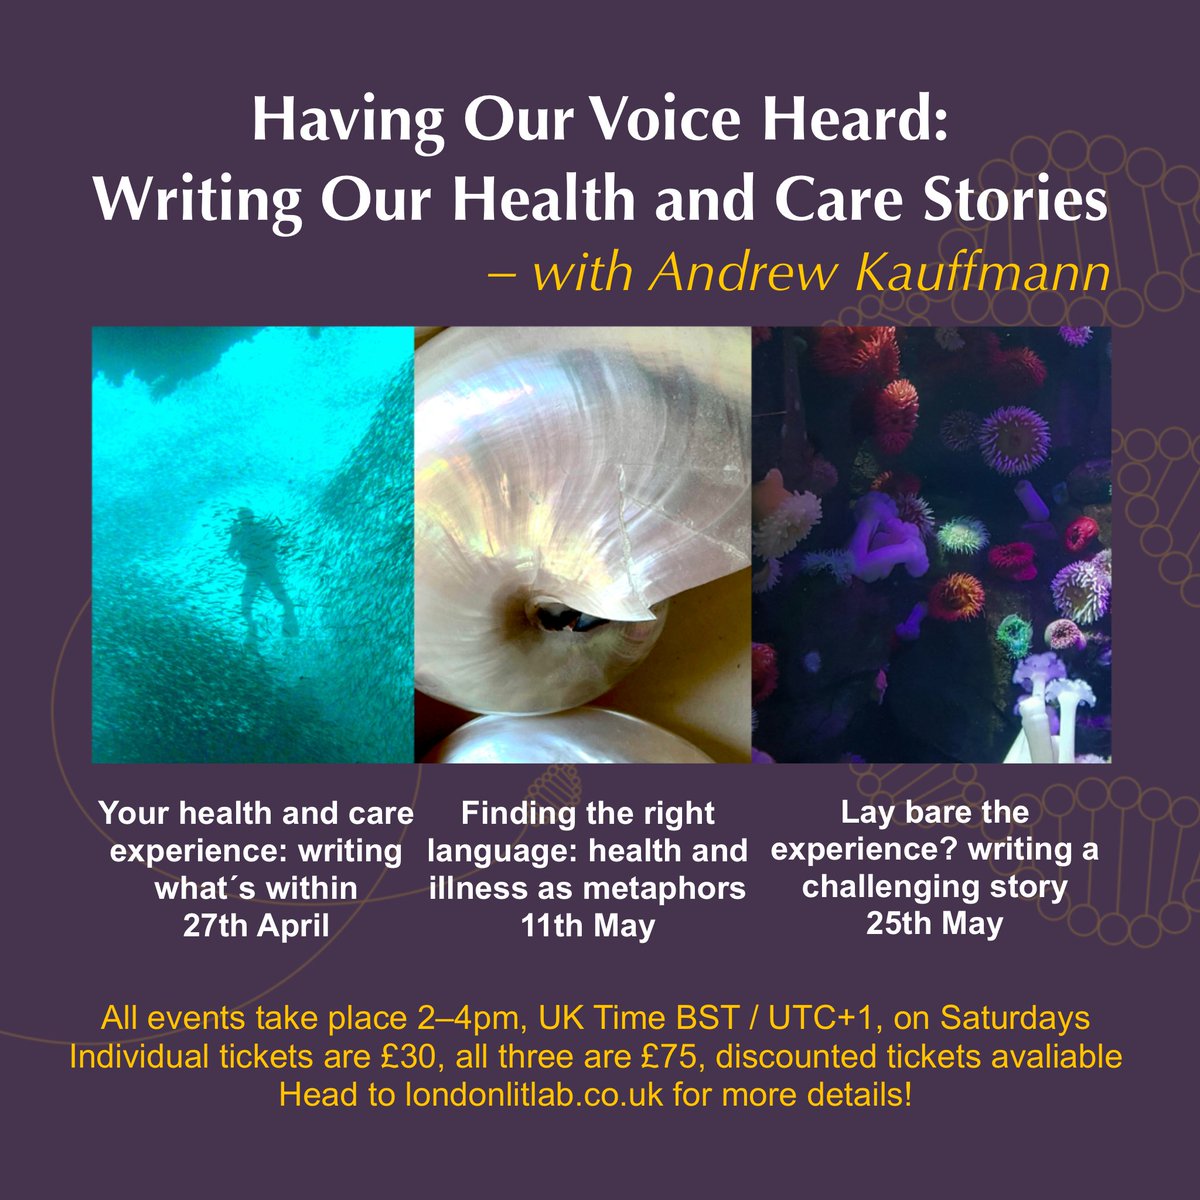 3 weeks today our new workshops @londonlitlab on #writing our #health & #care #stories get started londonlitlab.co.uk/course/health-… Have your #voice heard #writerslift #WritingCommunity #NHS #socialcare #healthcare #disabled #carers #carer #illness #diagnosis #story #satur